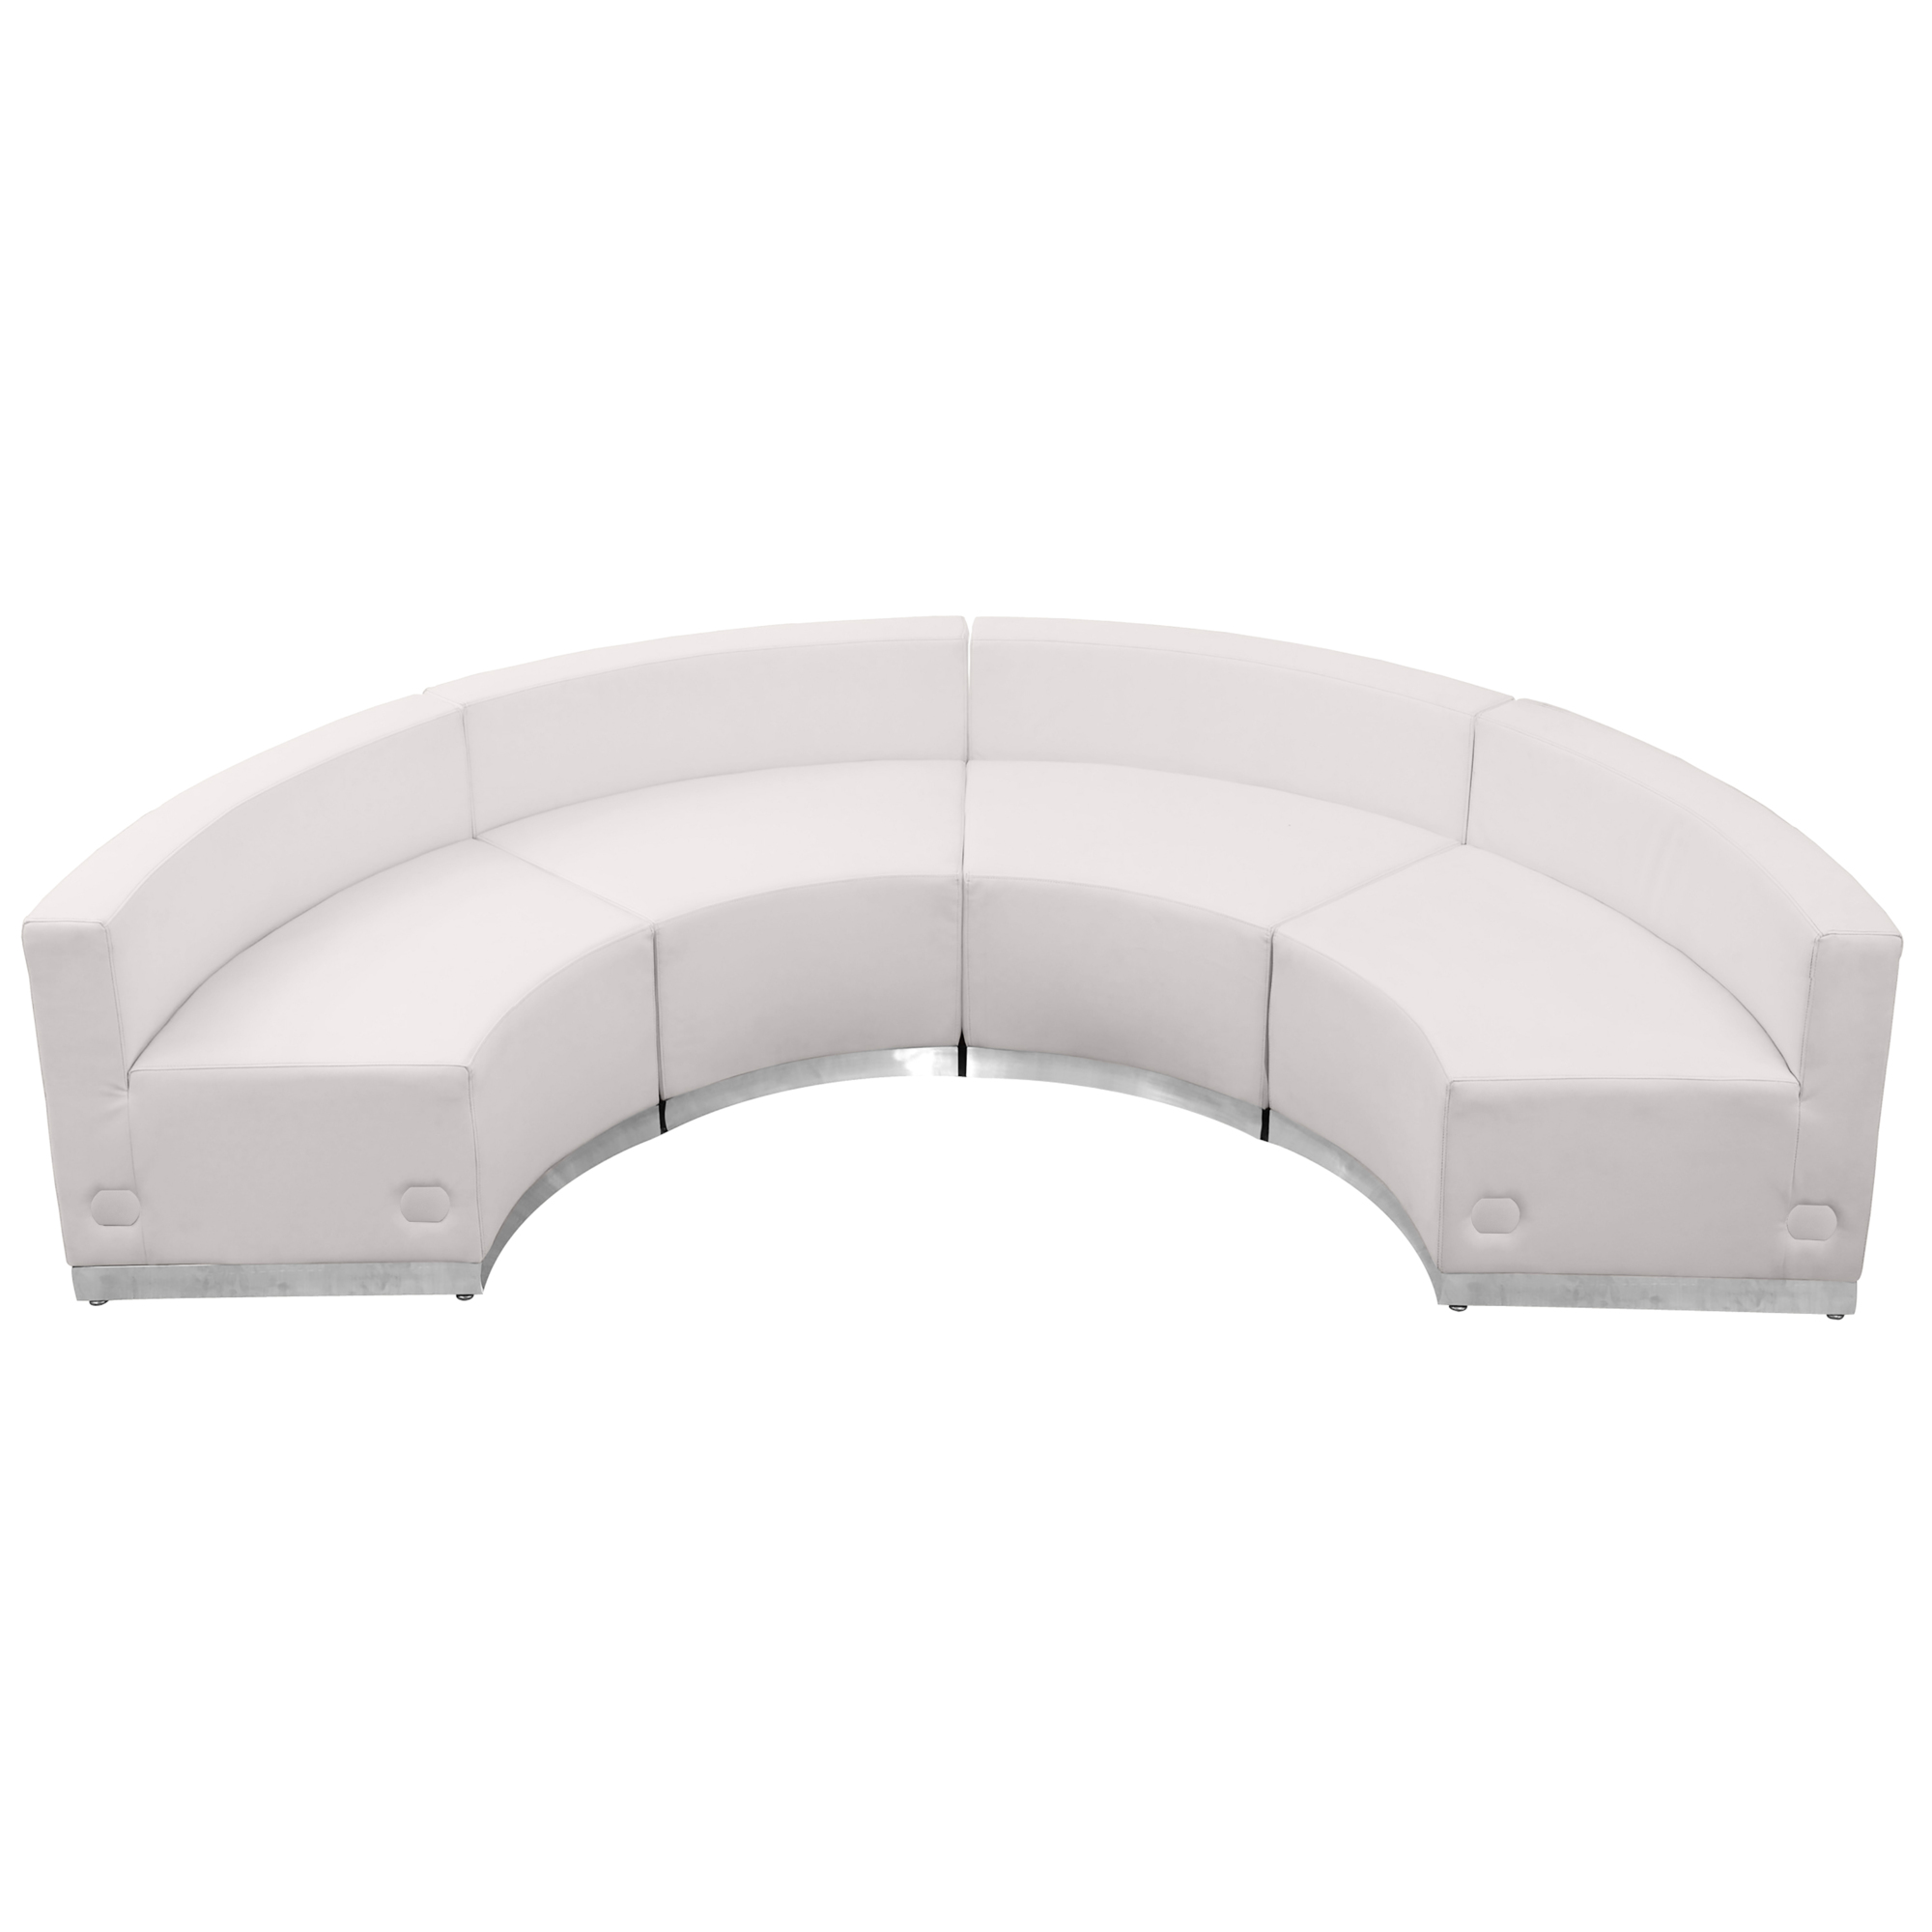 Flash Furniture, 4 PC White LeatherSoft Reception Configuration, Included (qty.) 4 Model ZB803480SWH